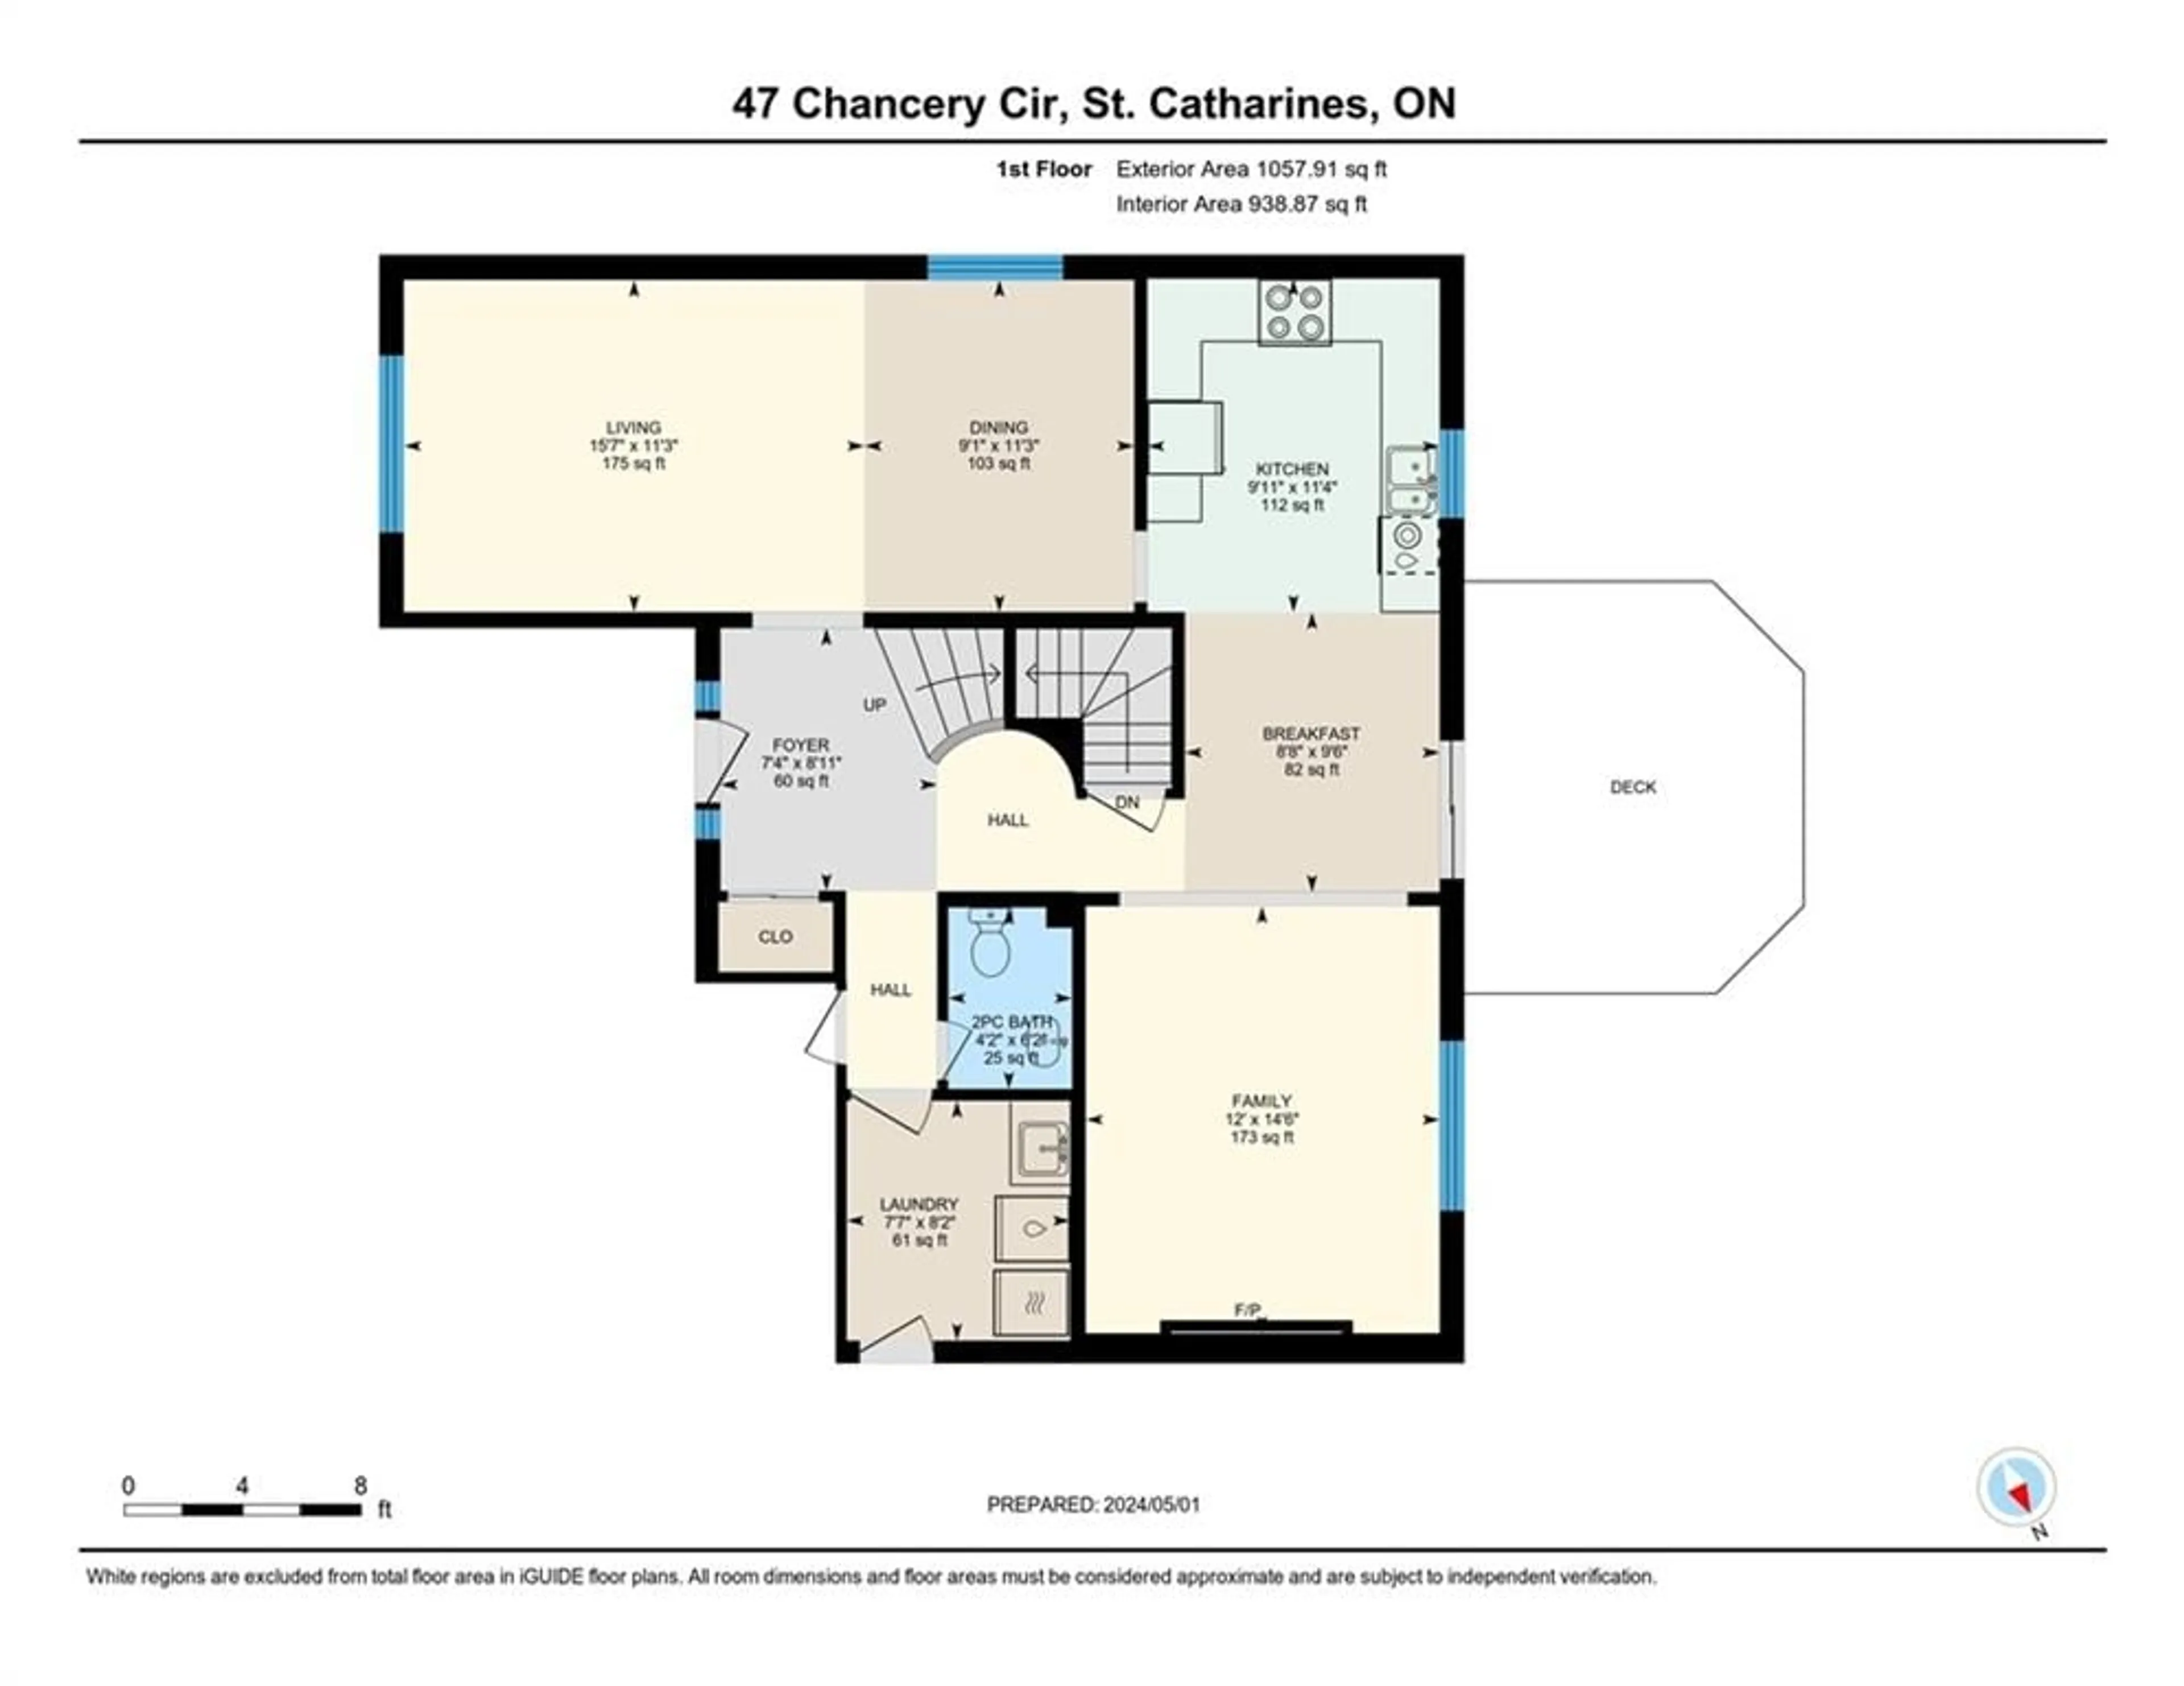 Floor plan for 47 CHANCERY Cir, St. Catharines Ontario L2M 7R3